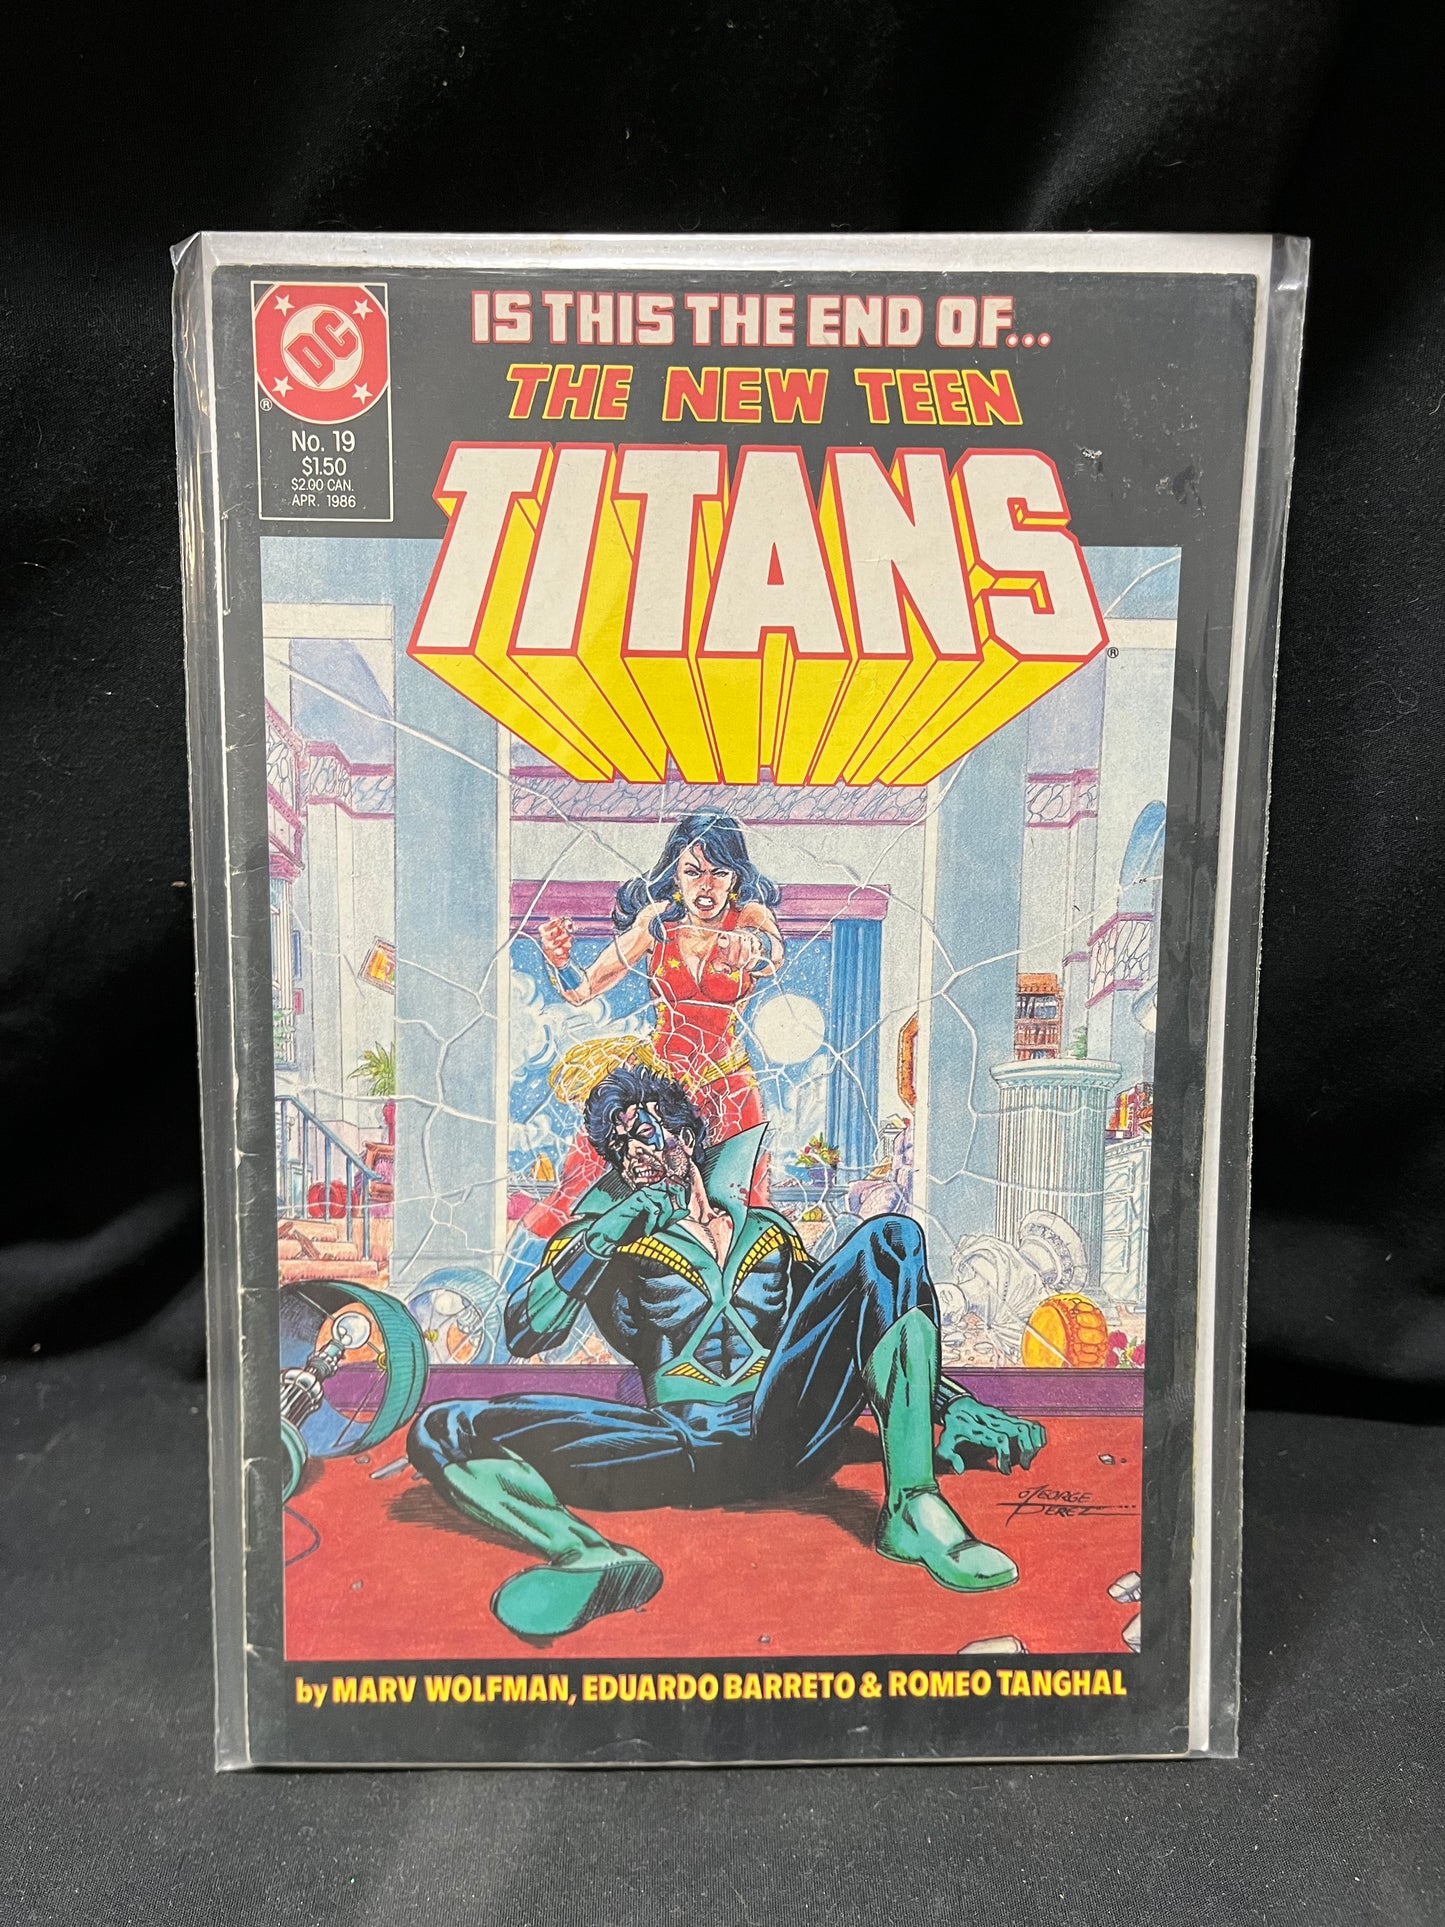 The New Teen Titans Comic Book - No. 19 This Is The End Of...